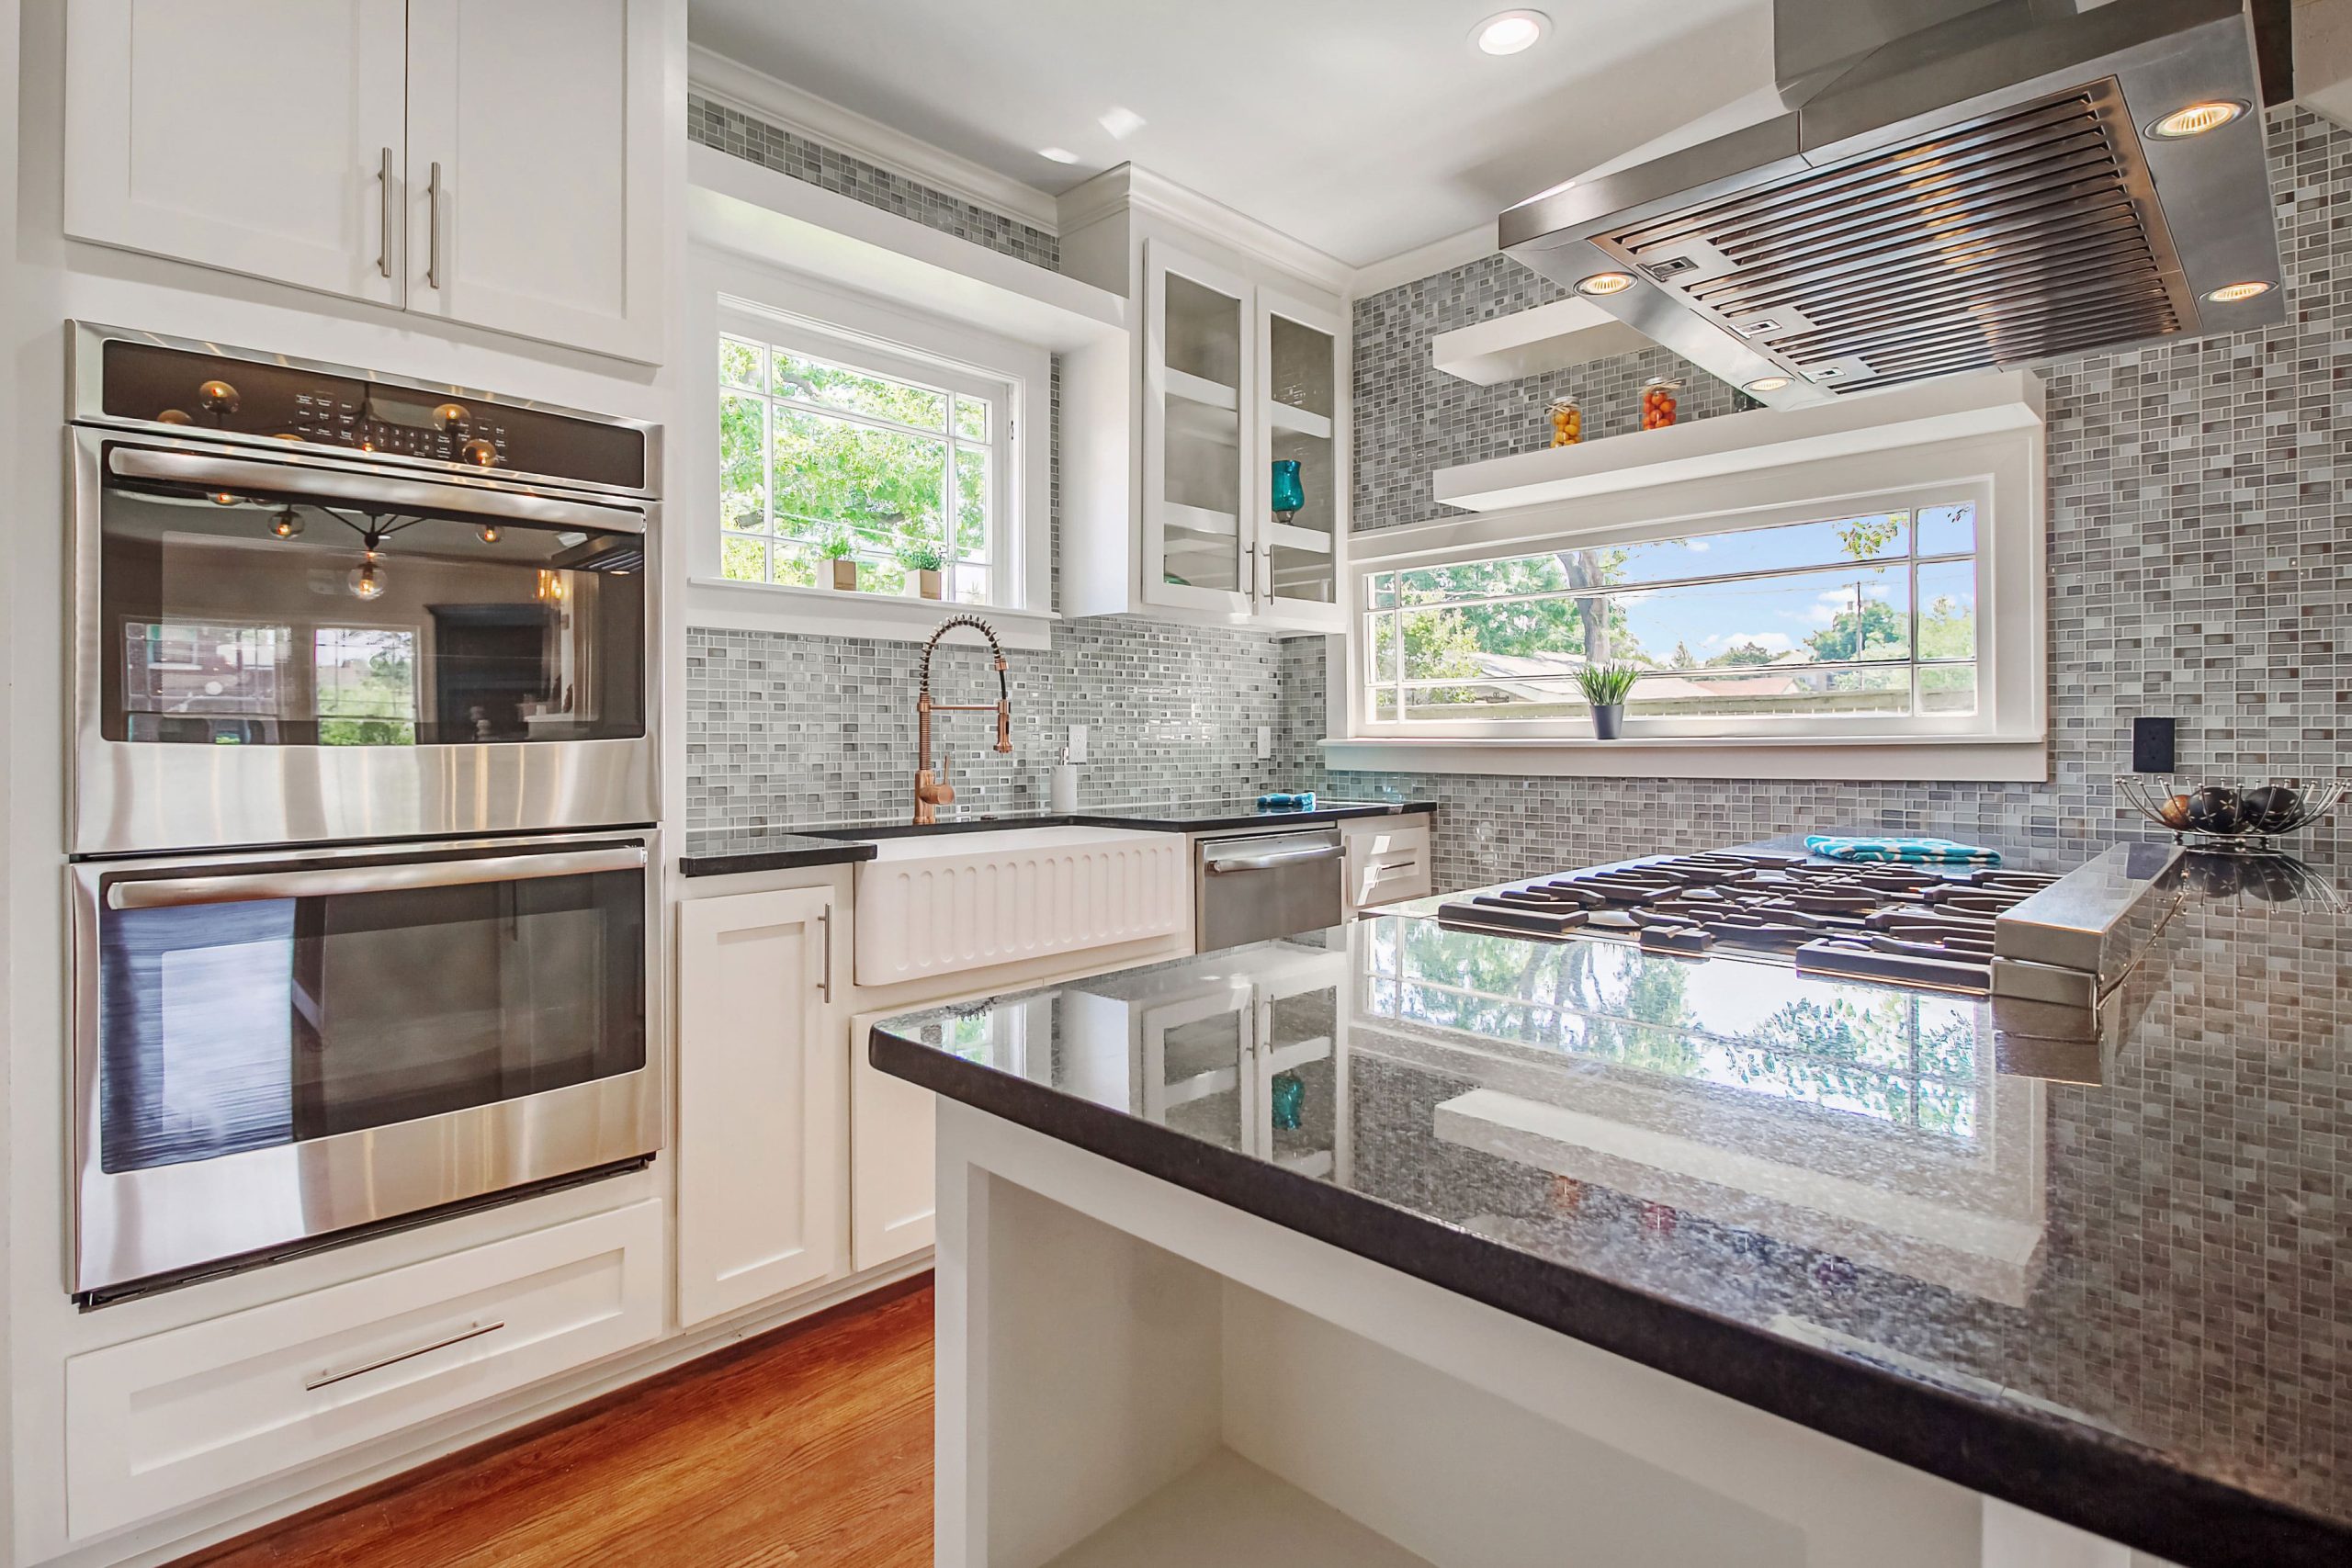 An image of a modern kitchen with sleek appliances, featuring a gas stove, refrigerator, and built-in microwave in Boca Raton